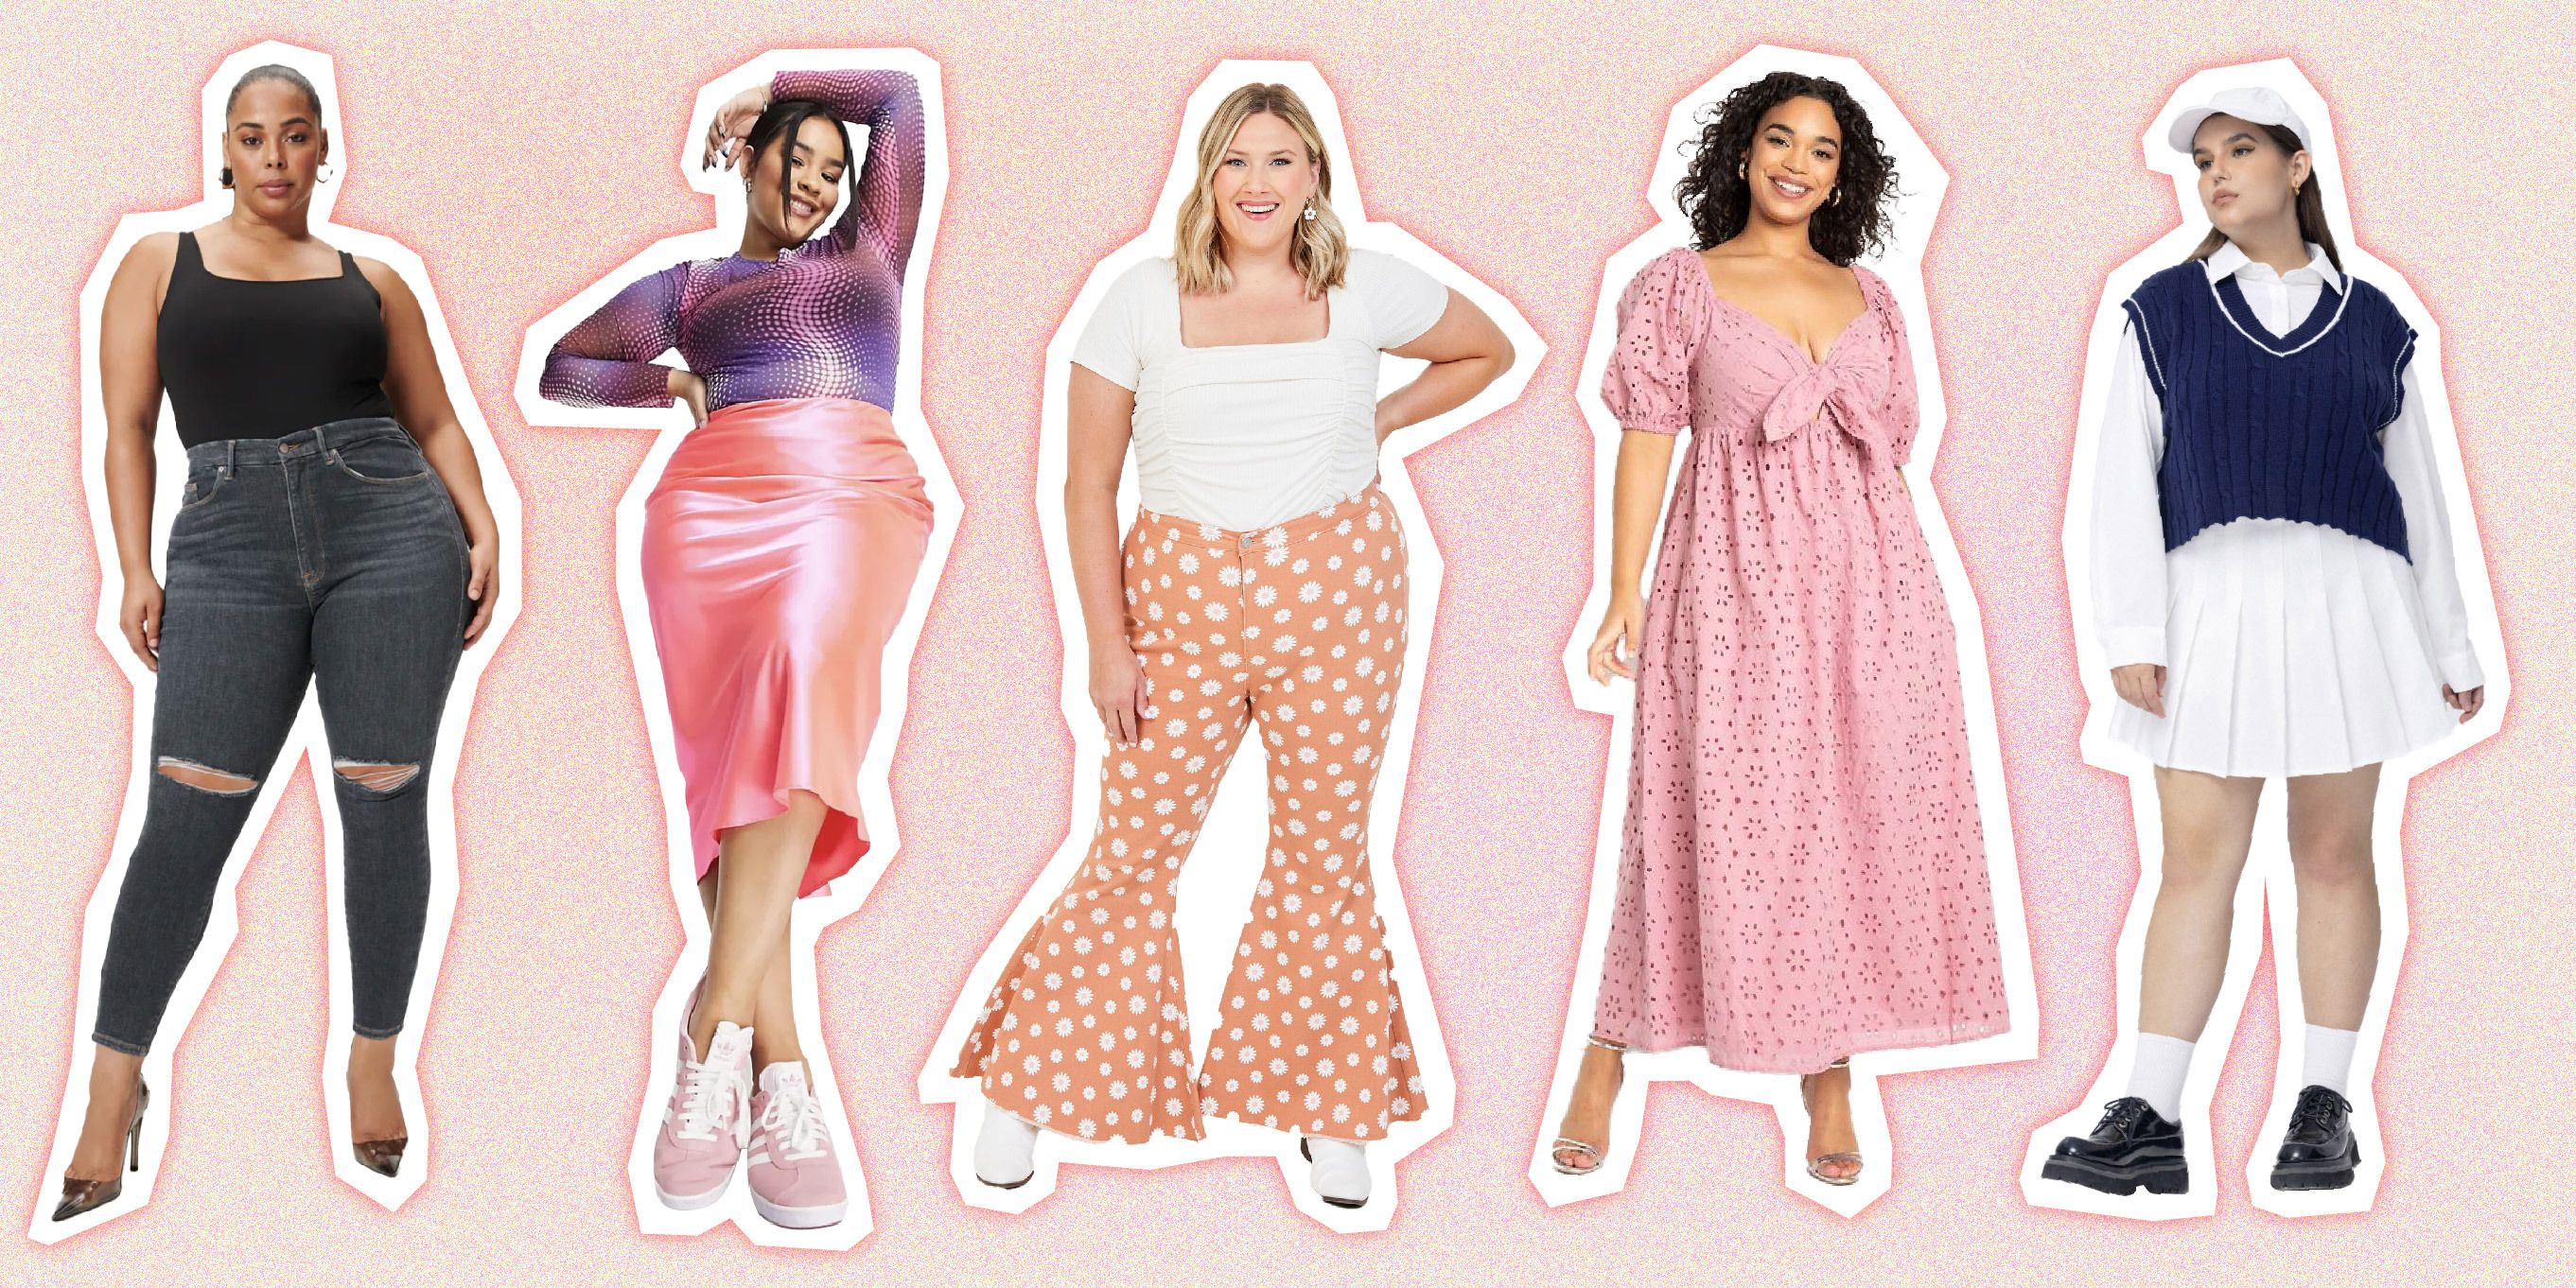 Plus Size Fashion The 16 Best Shopping Sites For Curvy Girls  StyleCaster